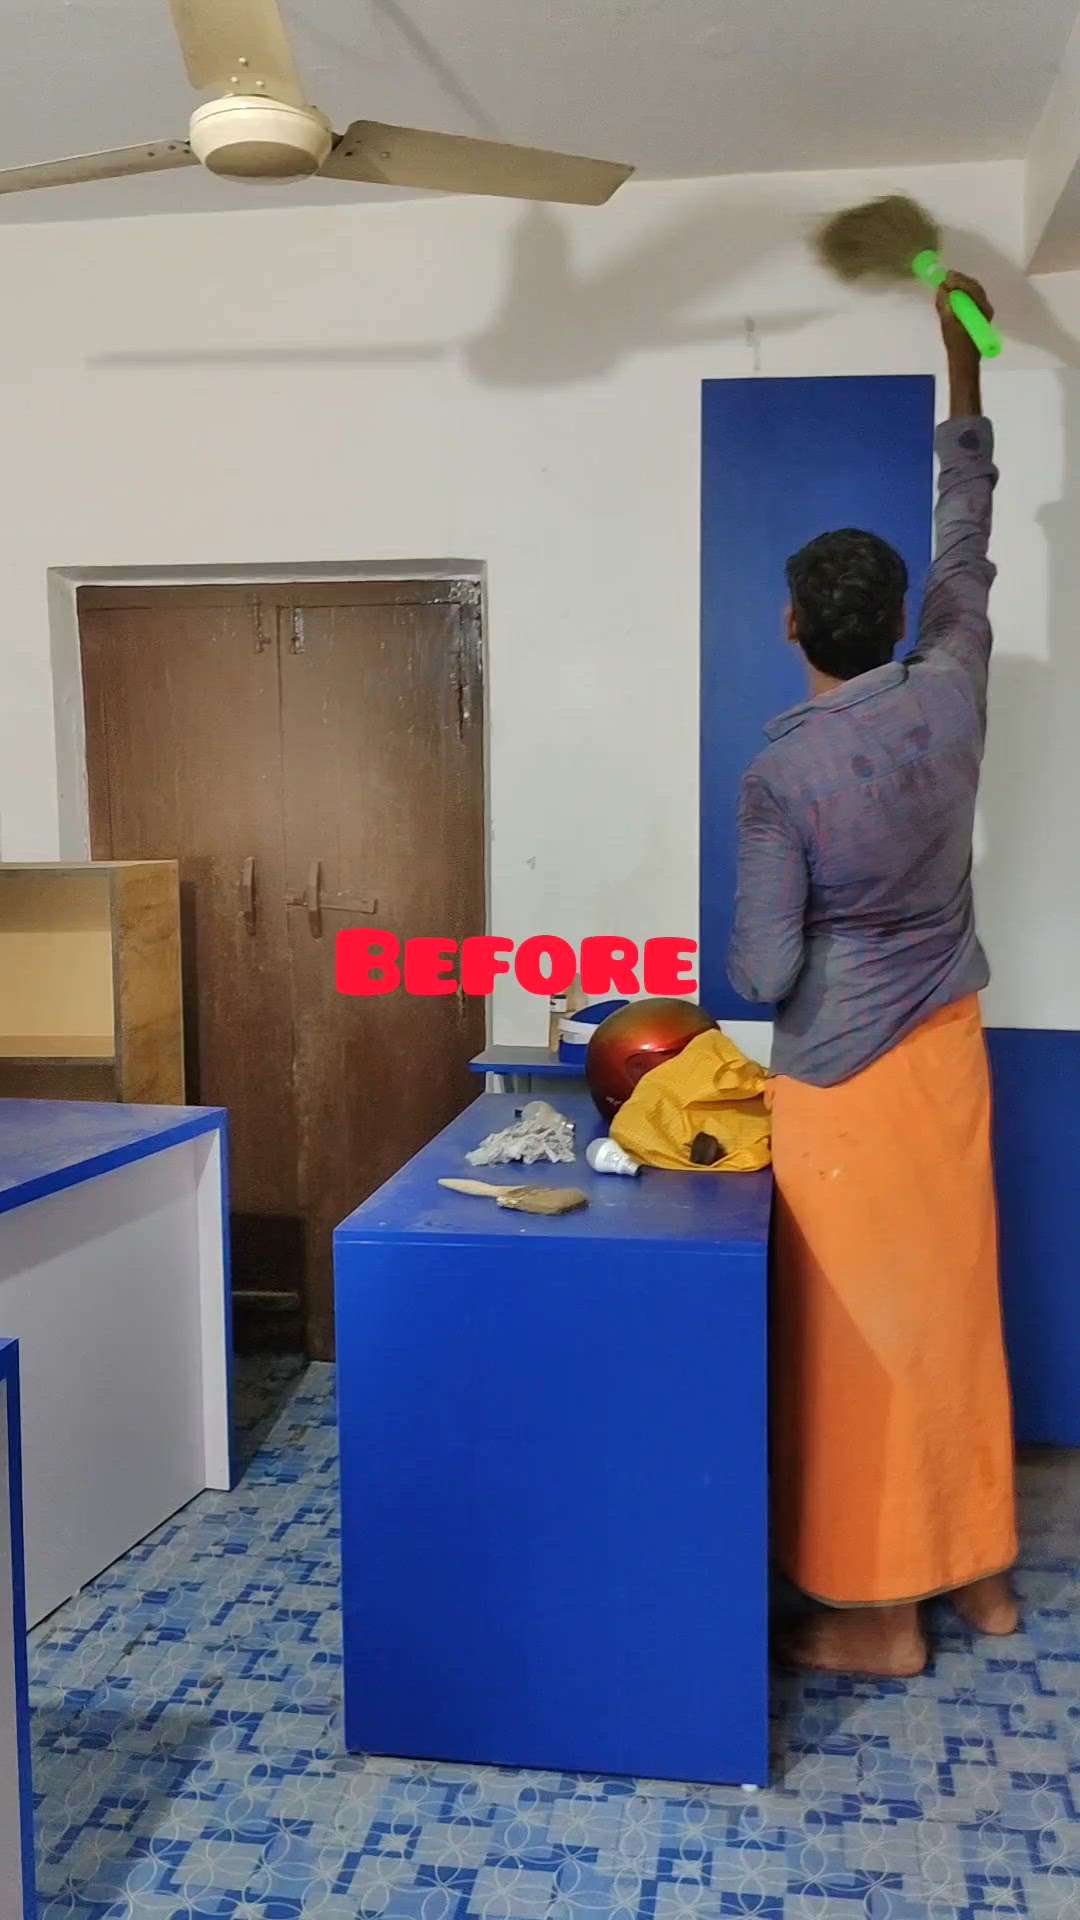 office cleaning just little bit #cleaning #officecleaning #cleaningsolutions #electricalworker #Mason 
#cctvcamera  #trivandram #Kollam #labour #Contractor